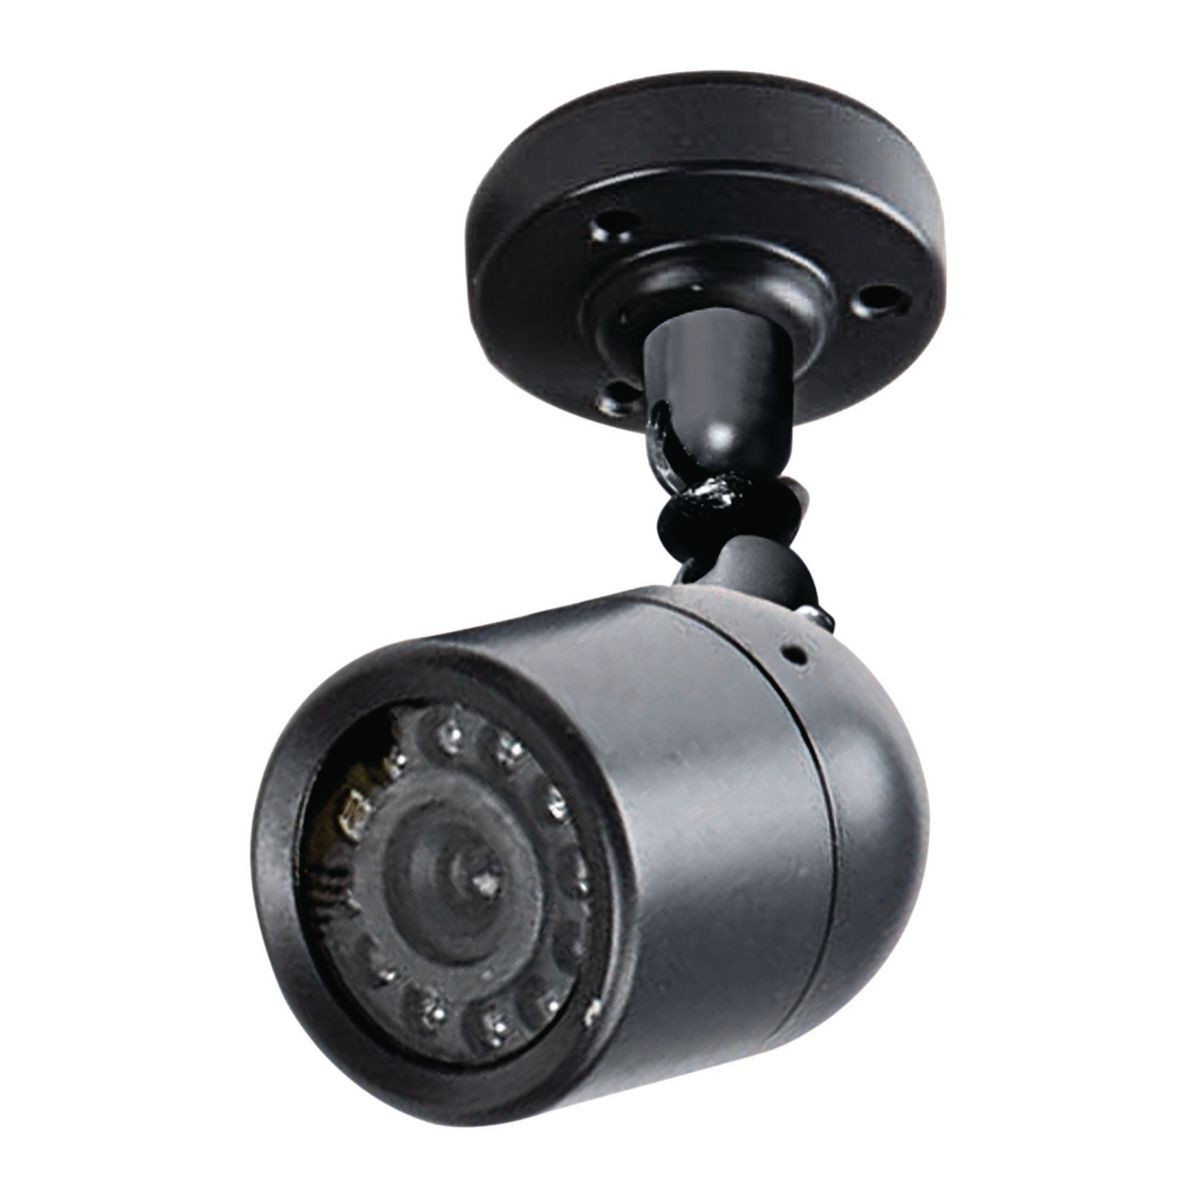 bunker hill security wireless color security cameras